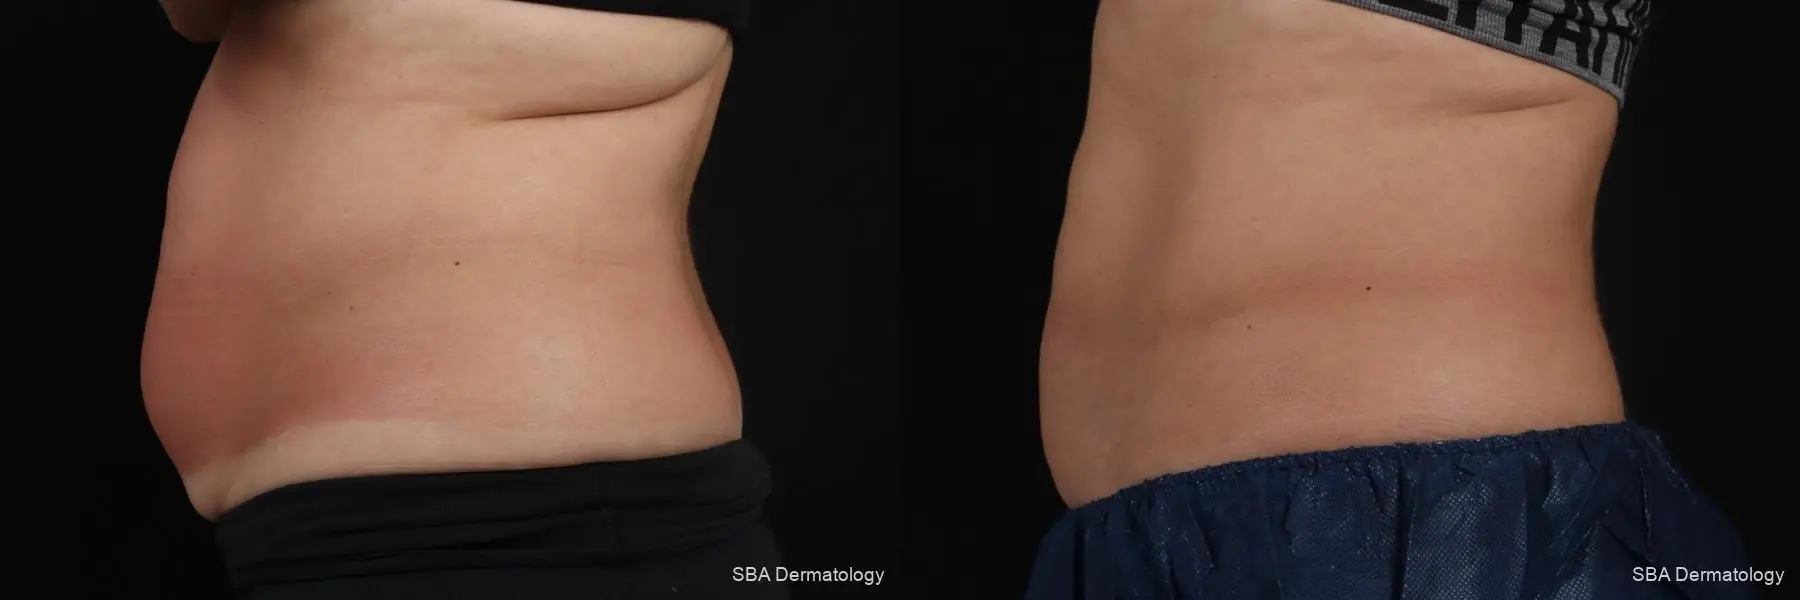 Coolsculpting: Patient 6 - Before and After 3